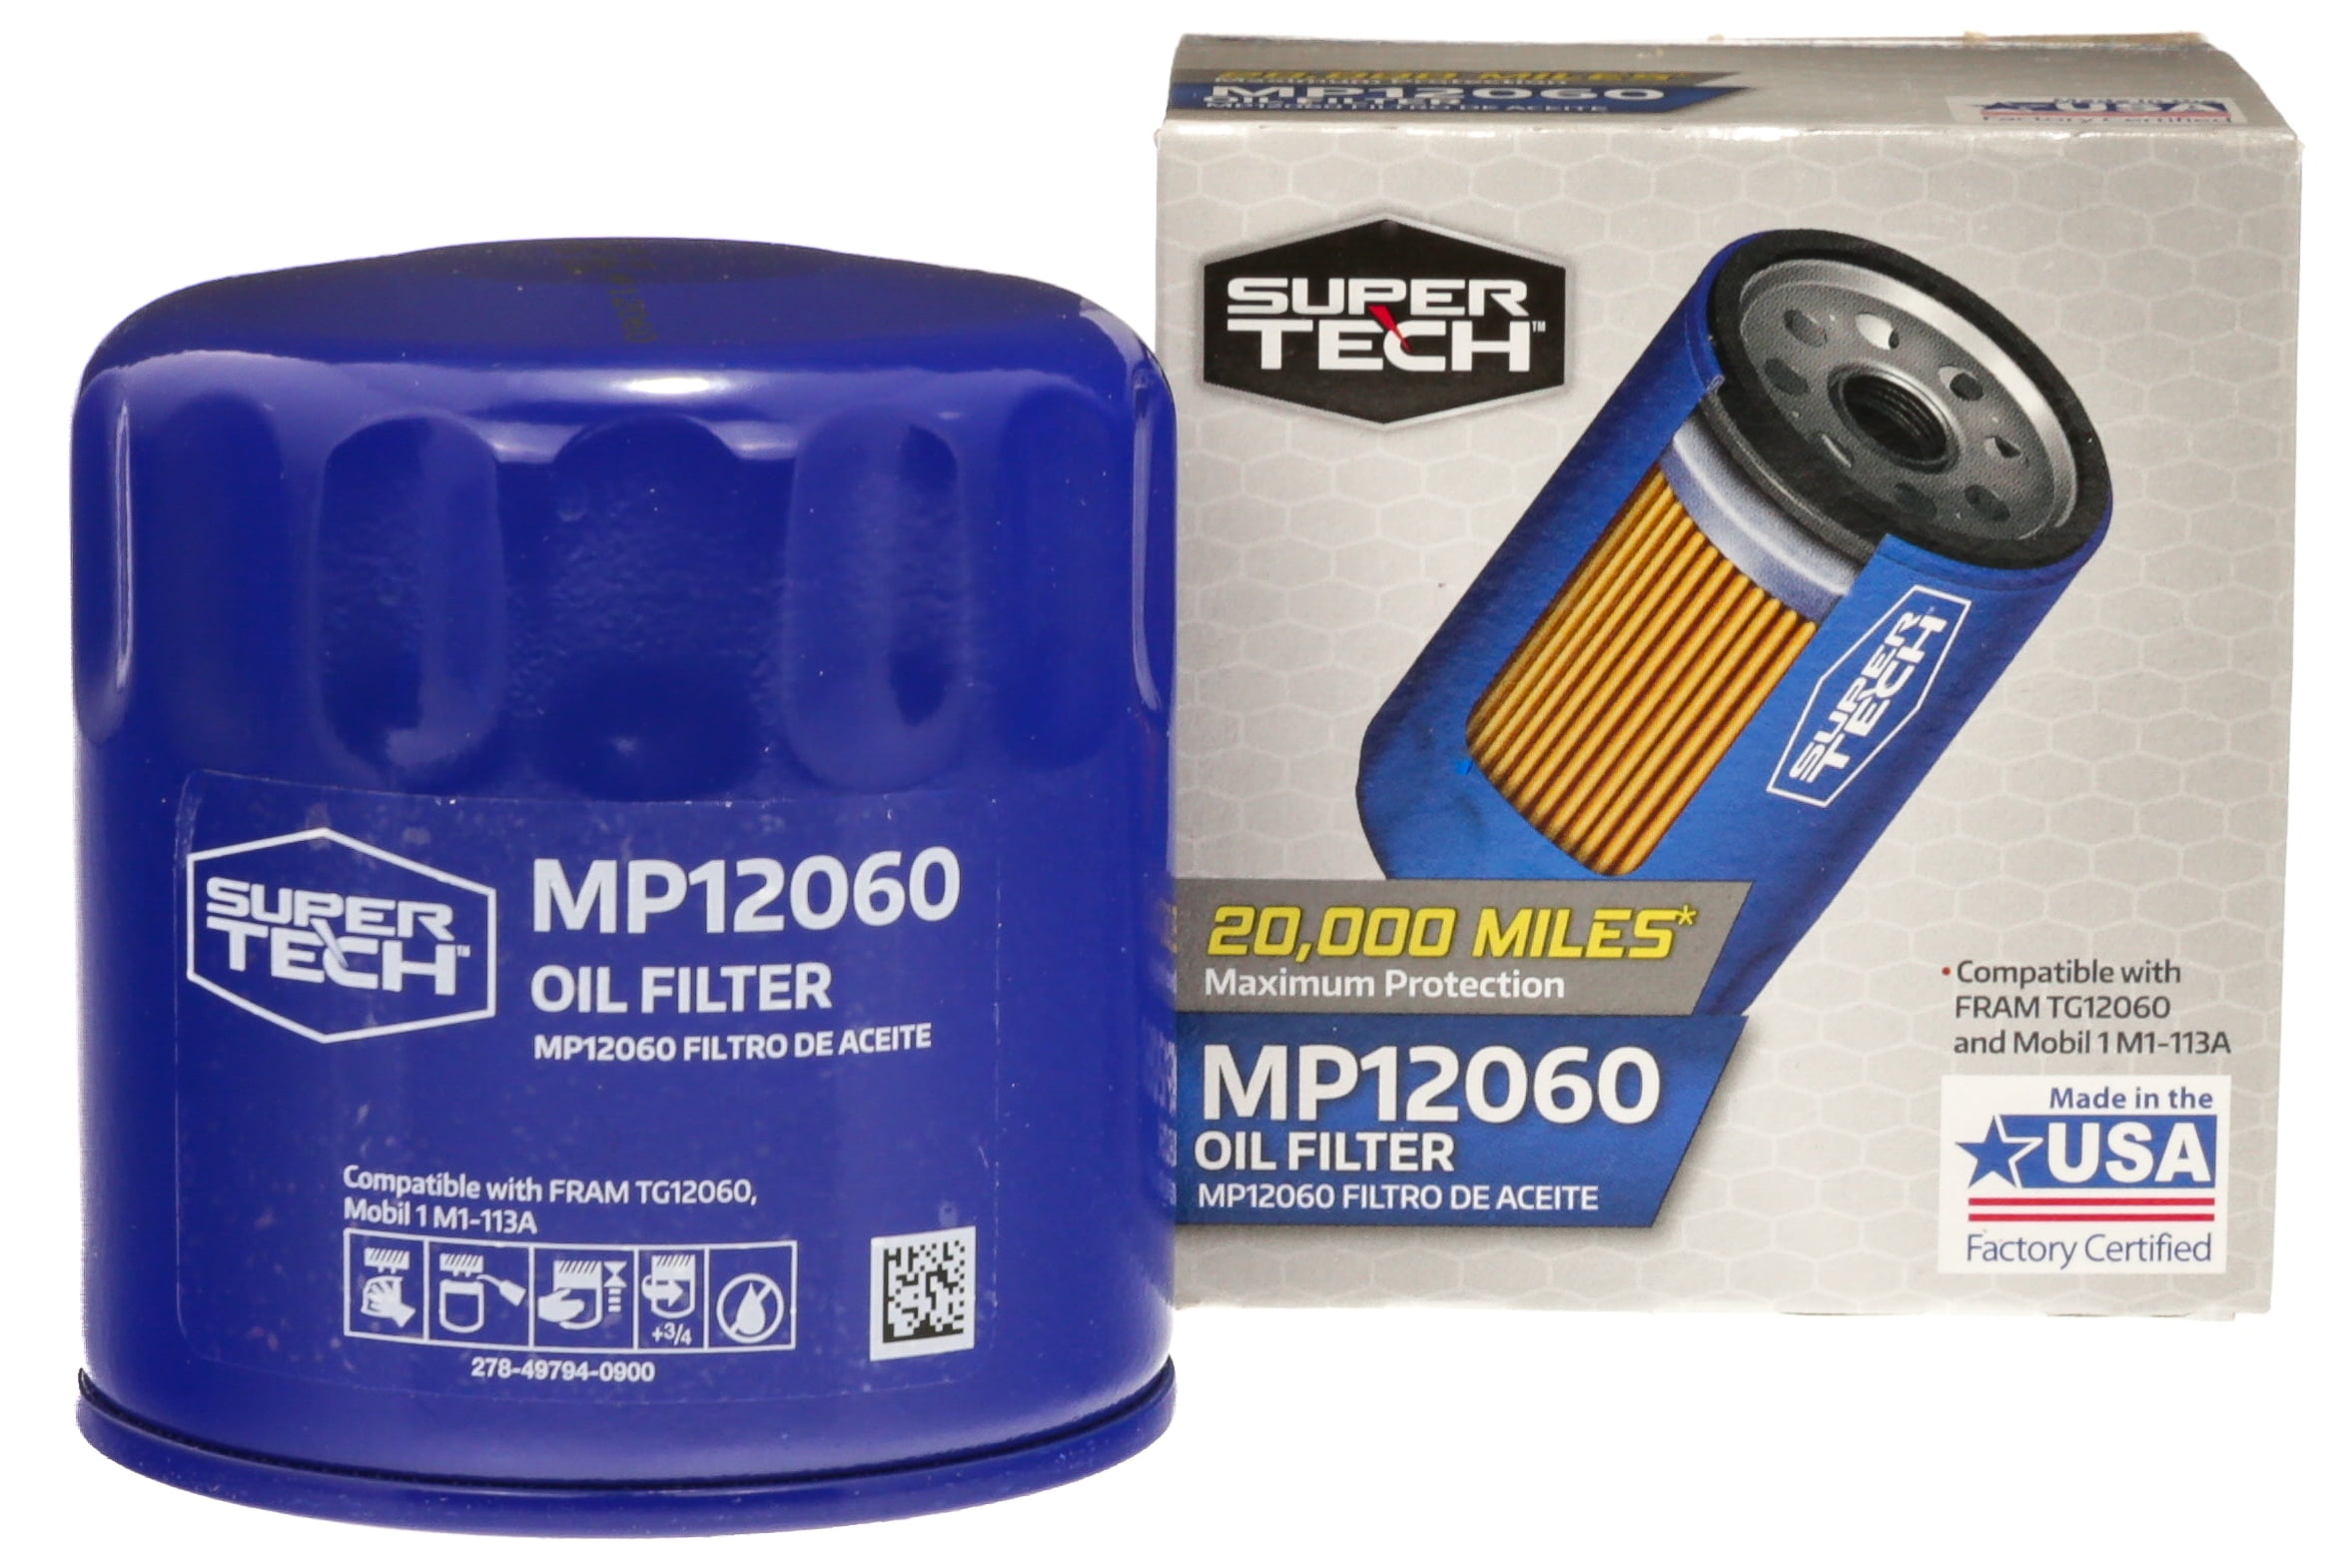 SuperTech Maximum Performance 20,000 mile Replacement Synthetic Oil Filter, MP12060, for Select Buick, Cadillac, Chevrolet, and GMC